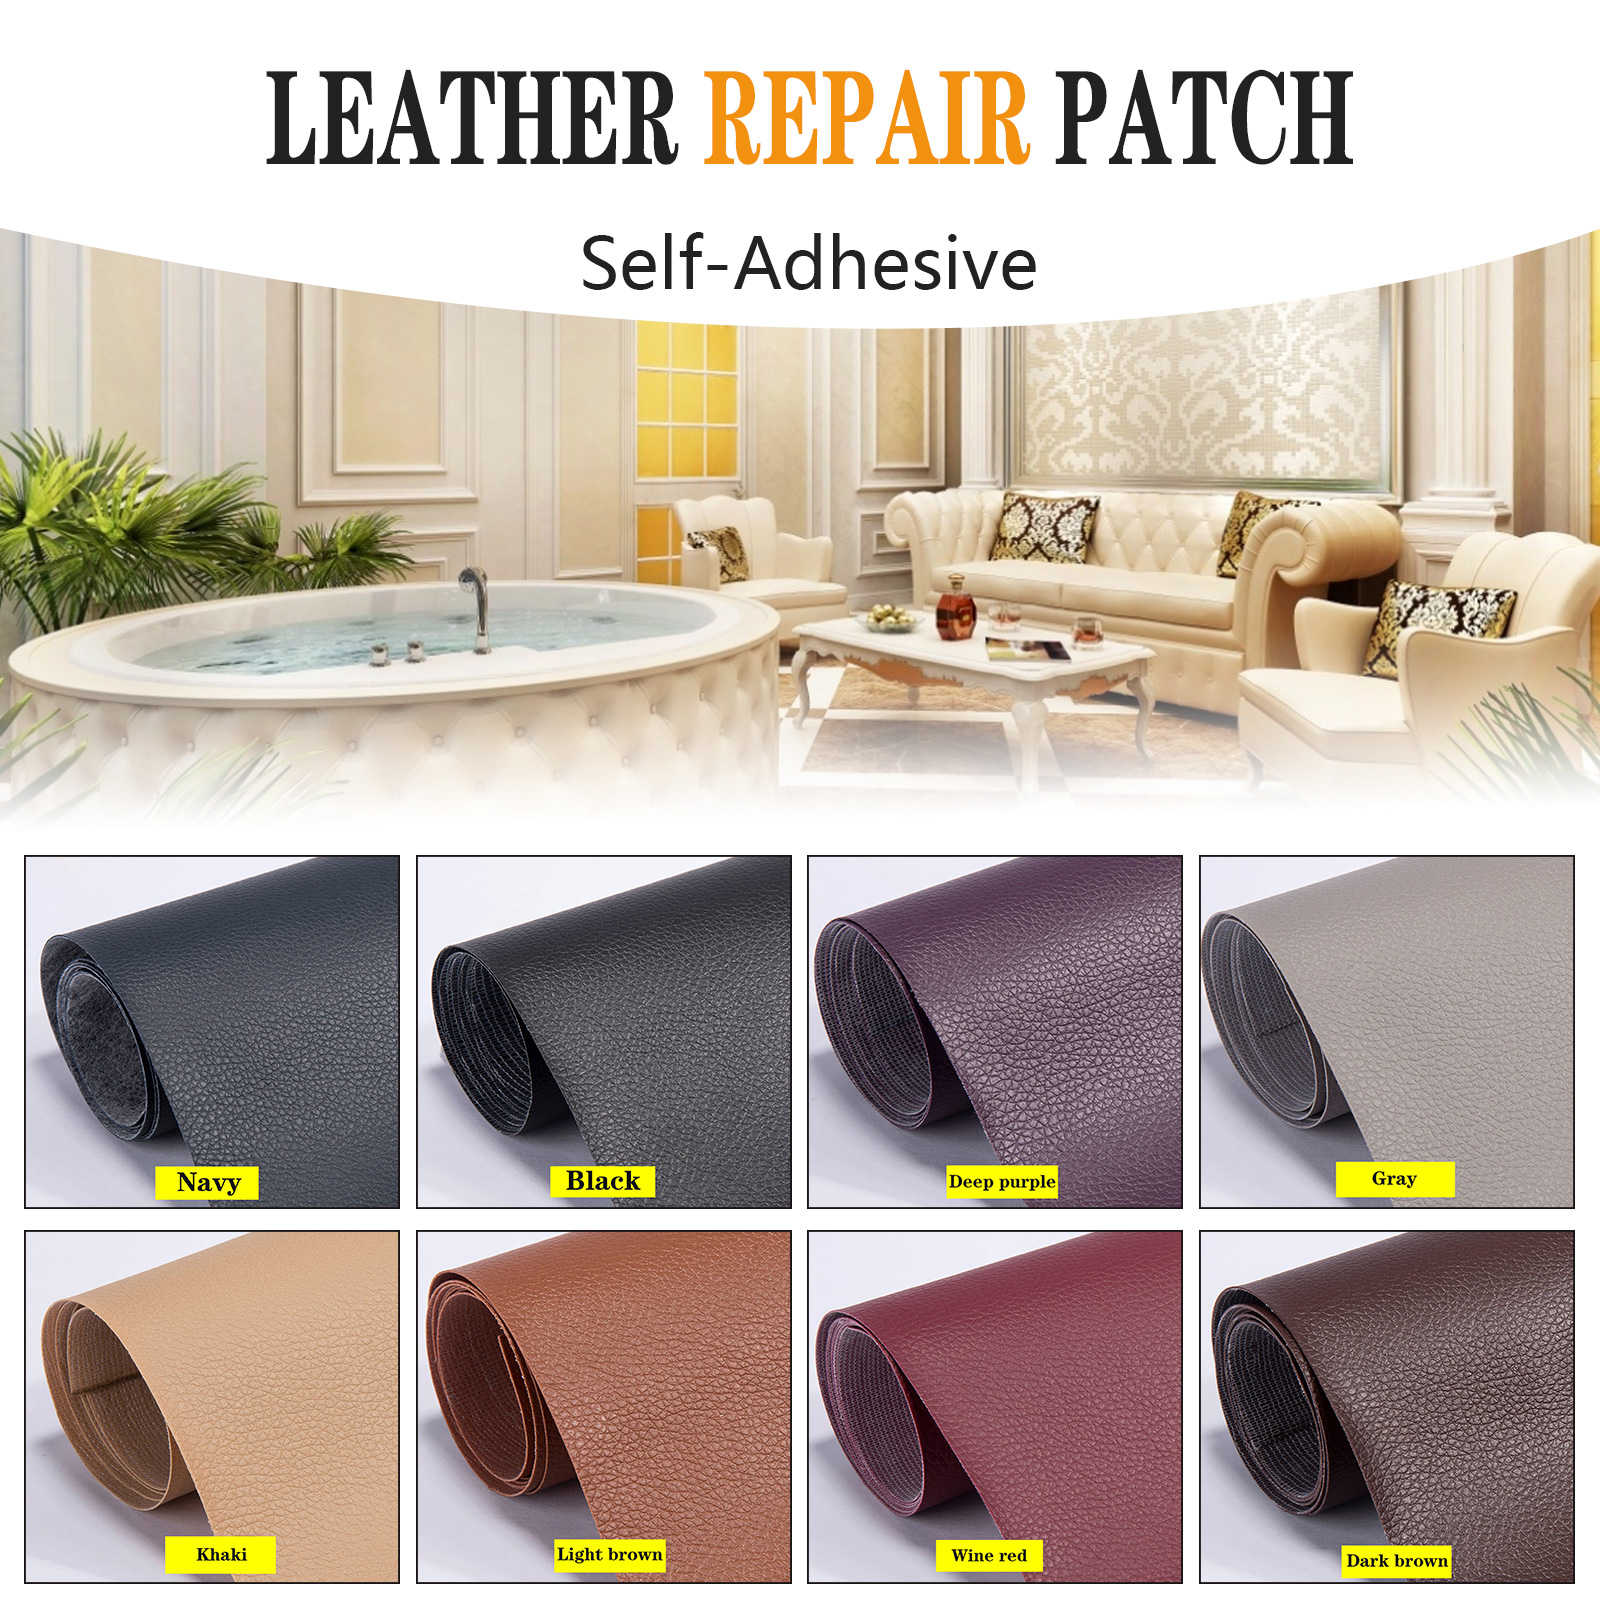 Aousthop Leather Repair Patch Self-Adhesive, 8 x 12 inch, Waterproof, DIY  PU Litchi Replace Decorate Faux Leather Repair Patch for Couches,  Furniture, Kitchen Cabinets, Wall, Jackets, Sofa, Boots 